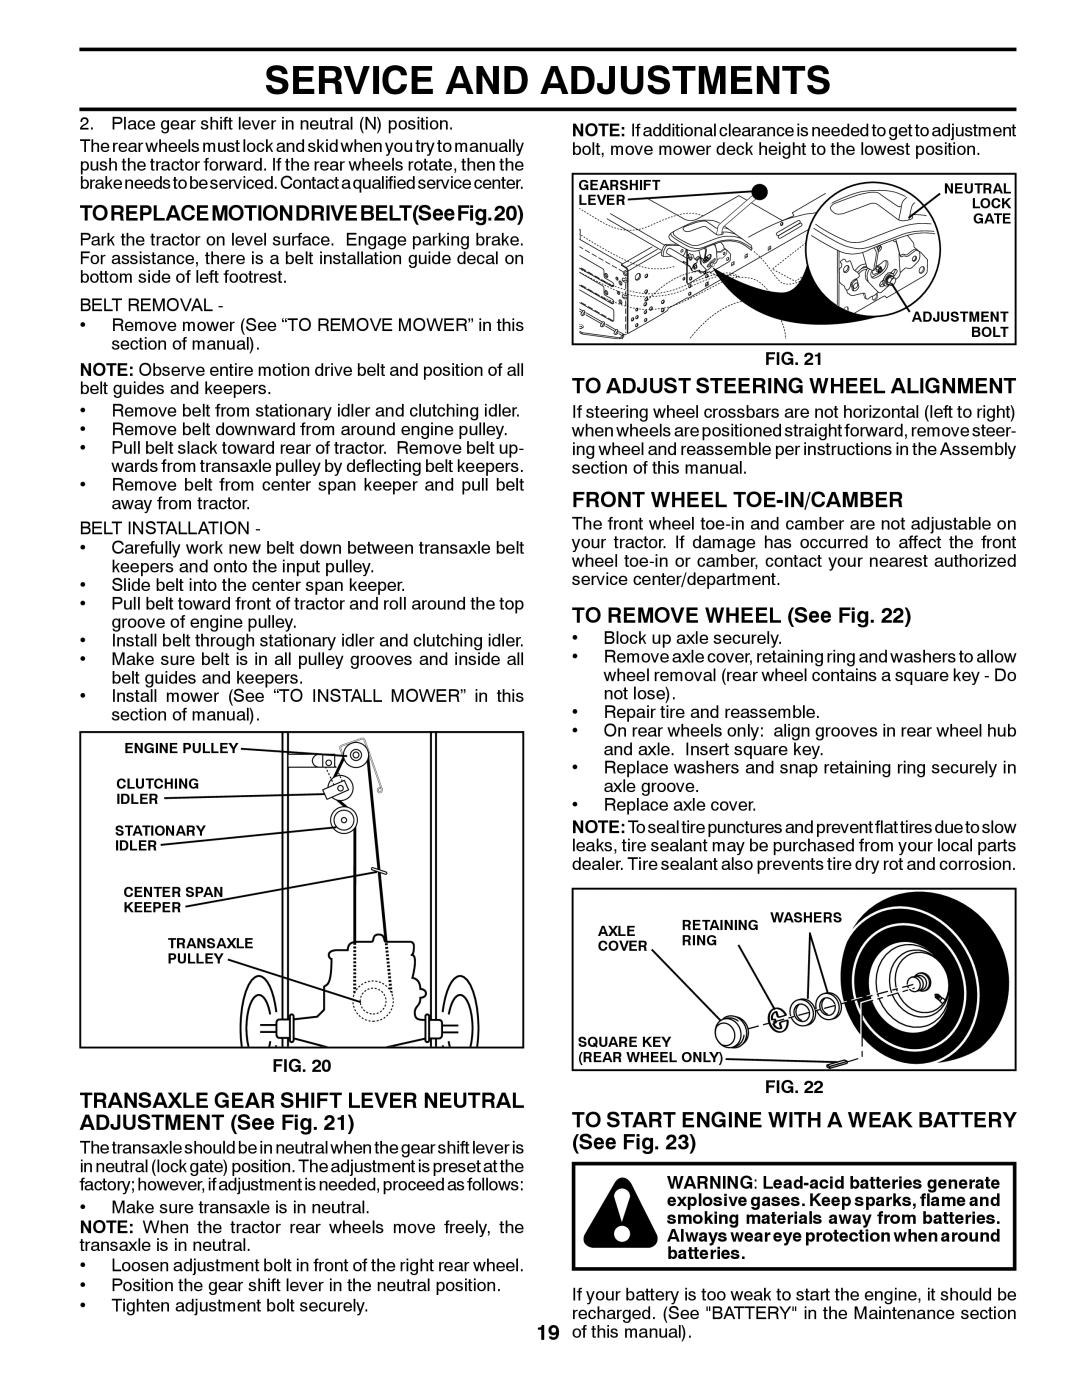 Poulan 433401 manual To Adjust Steering Wheel Alignment, Front Wheel TOE-IN/CAMBER 